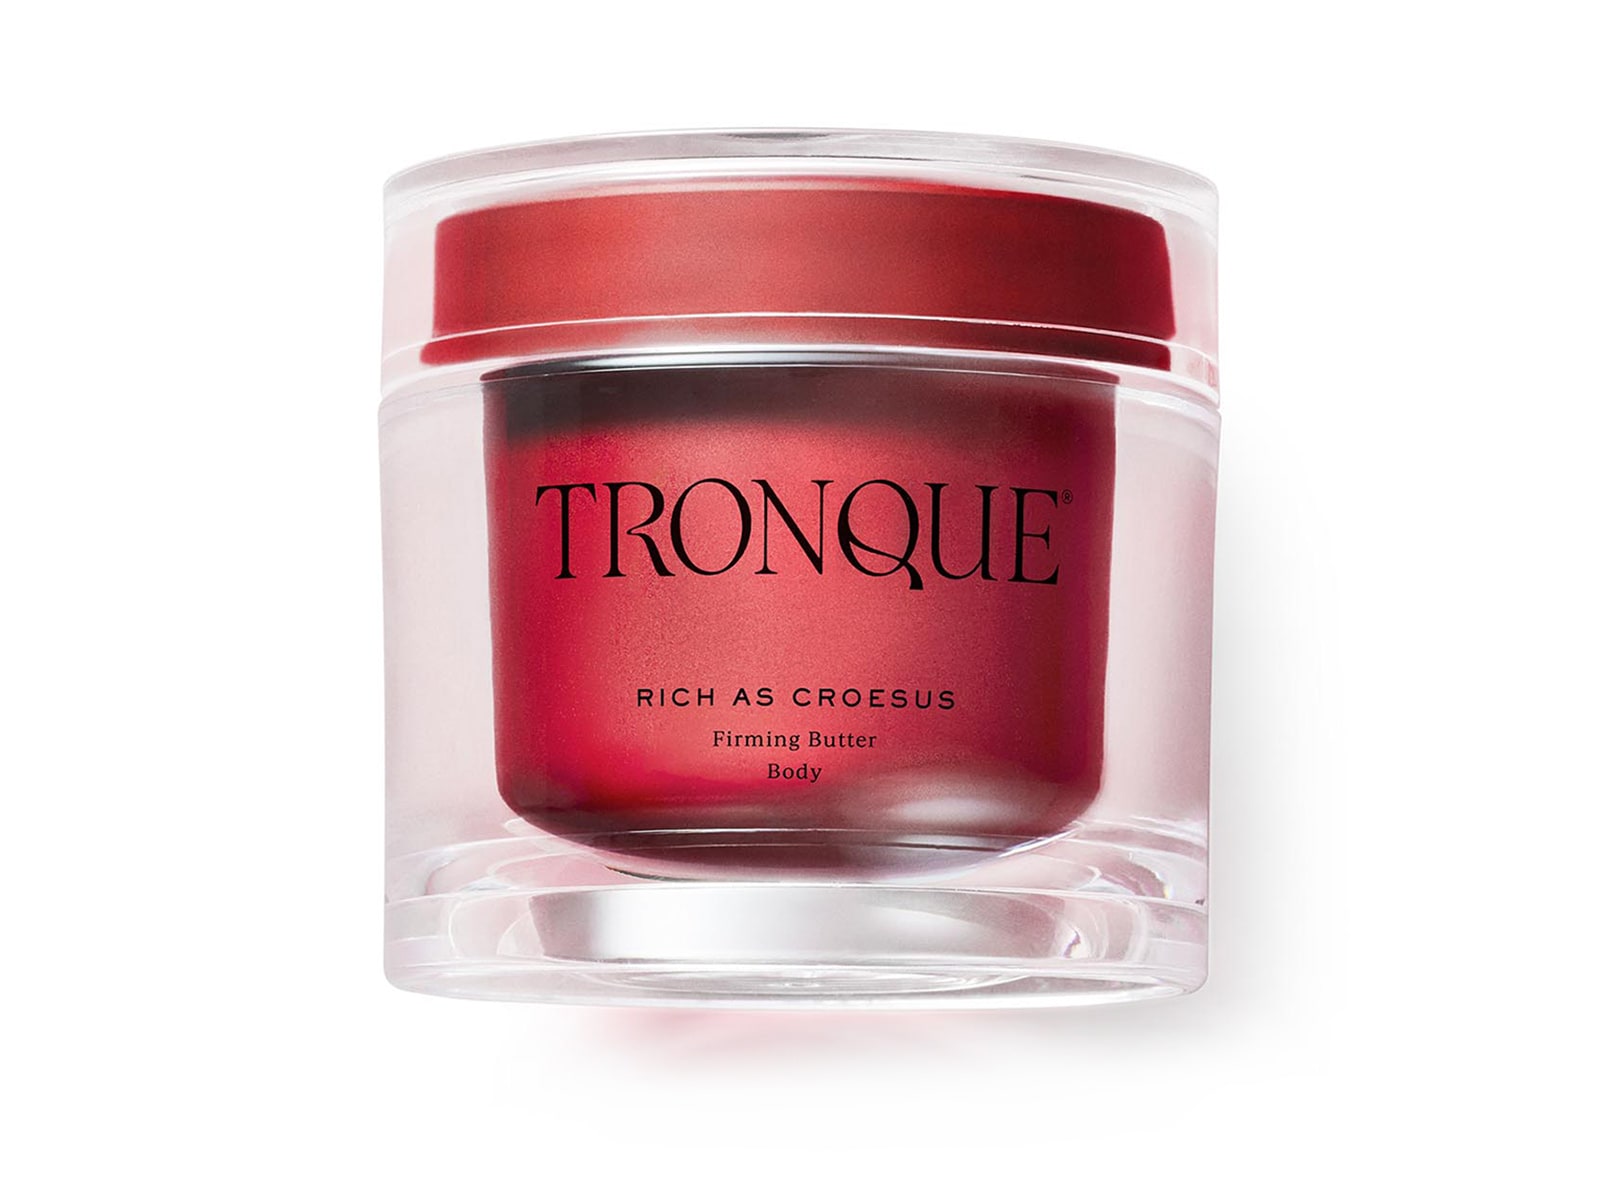 Tronque Rich as Croesus Firming Butter, $130 